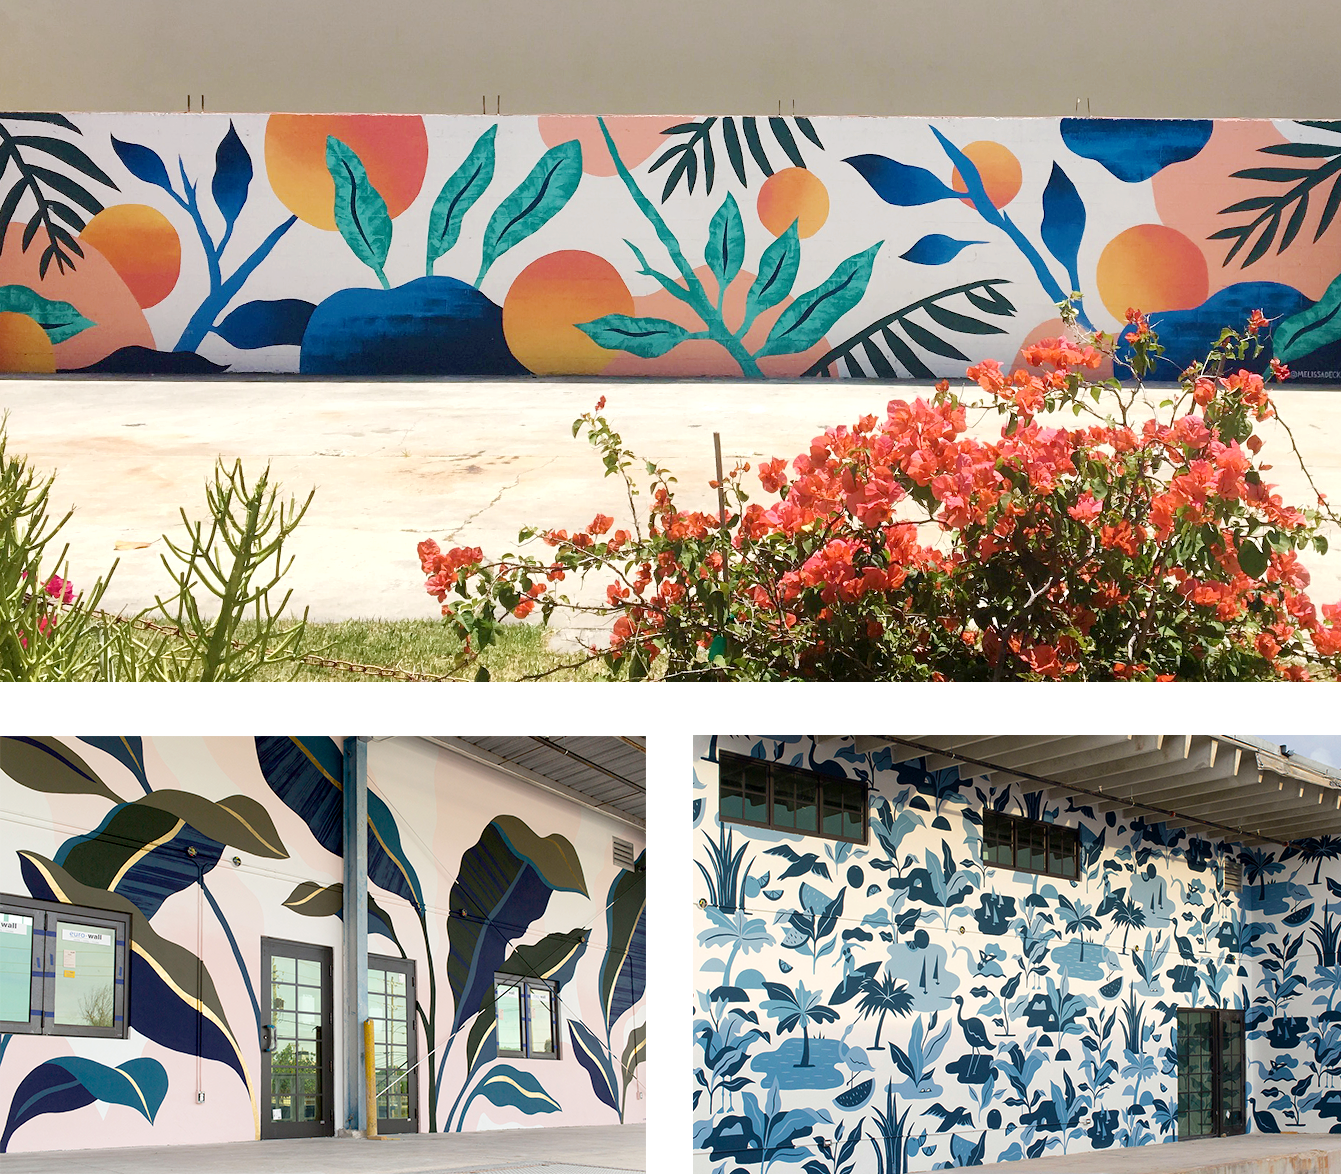 Collage of murals done by Melissa Deckert, that Gather & Seek assisted, including abstract botanical scenes for Elizabeth Ave Station and Grandview Public Market.